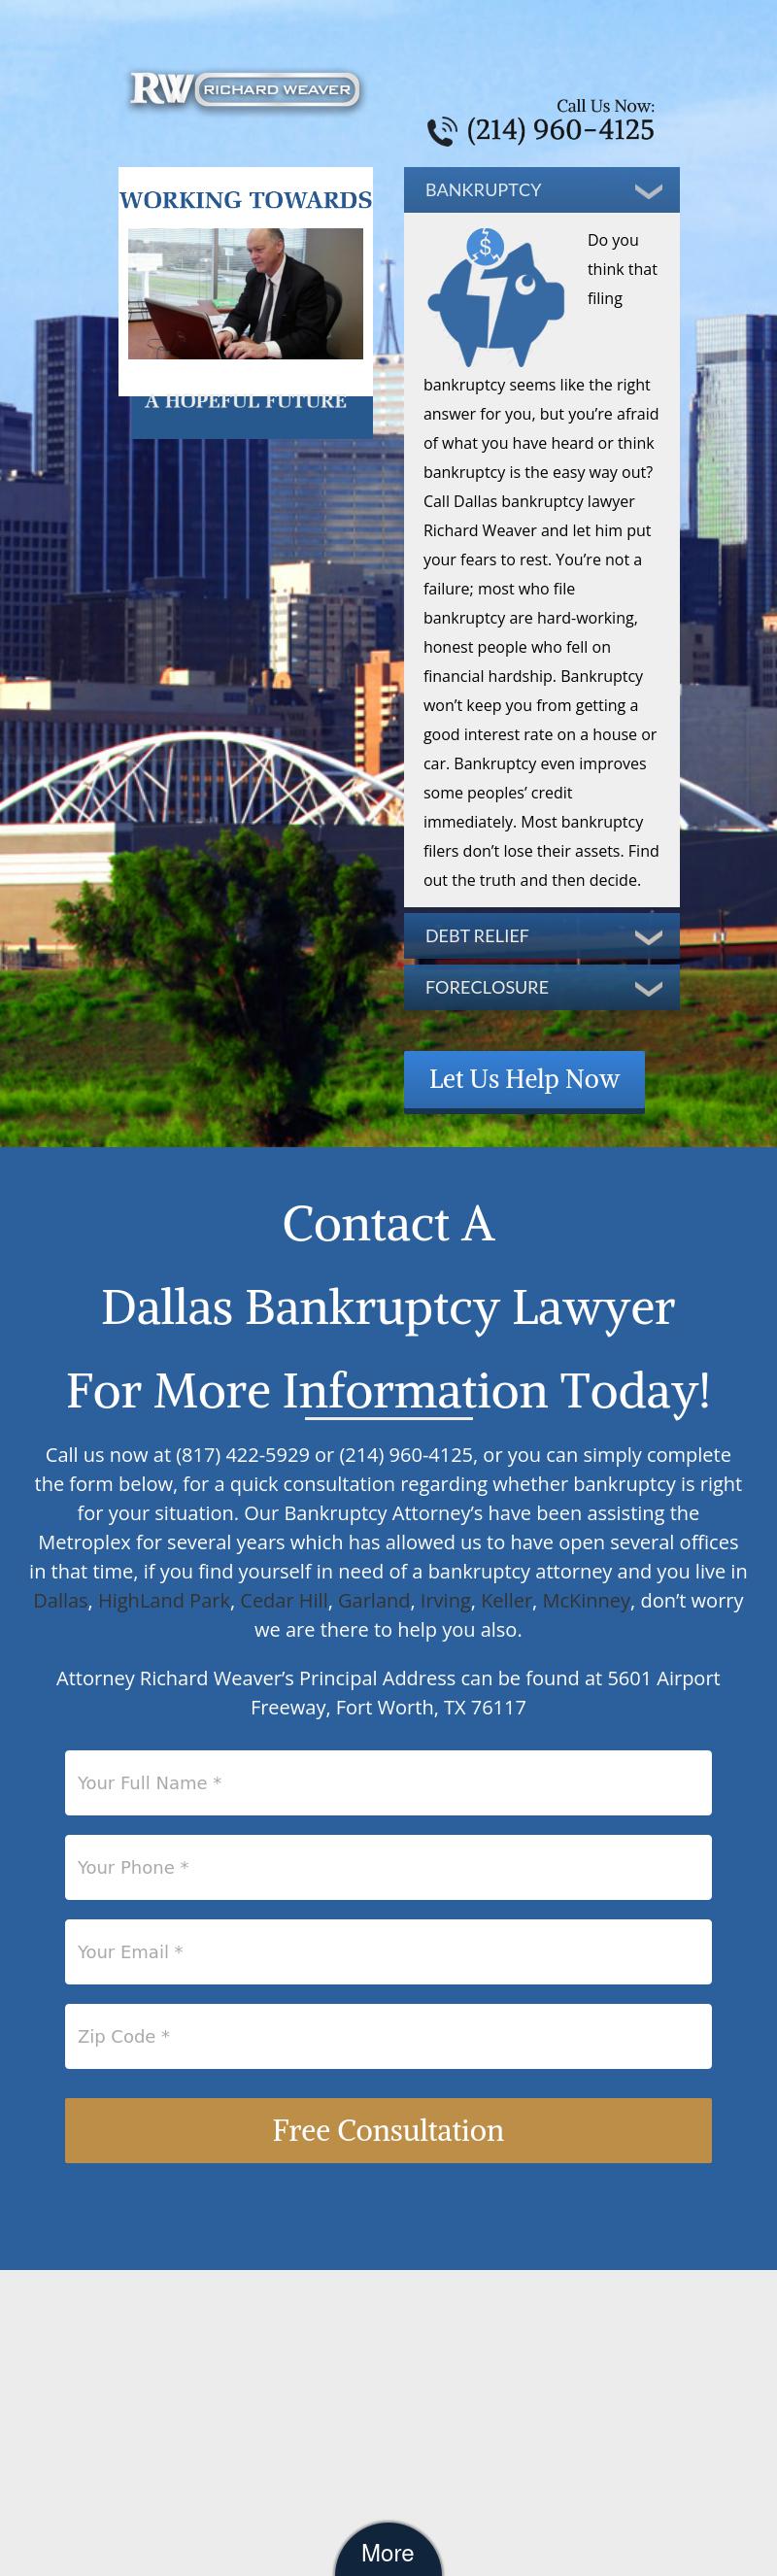 Bankruptcy Attorney Richard Weaver & Associates - Fort Worth TX Lawyers